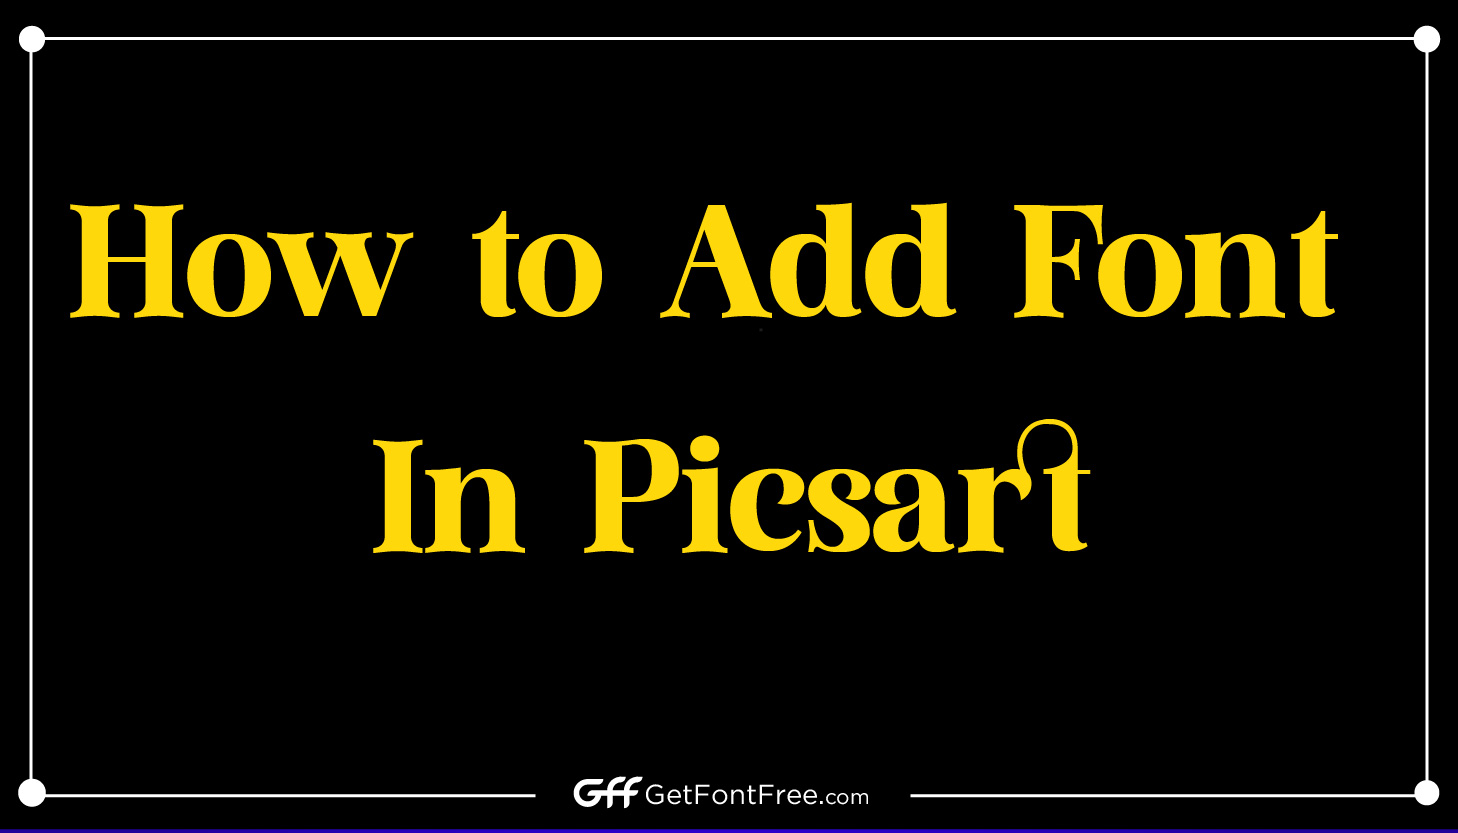 How to Add Font In Picsart